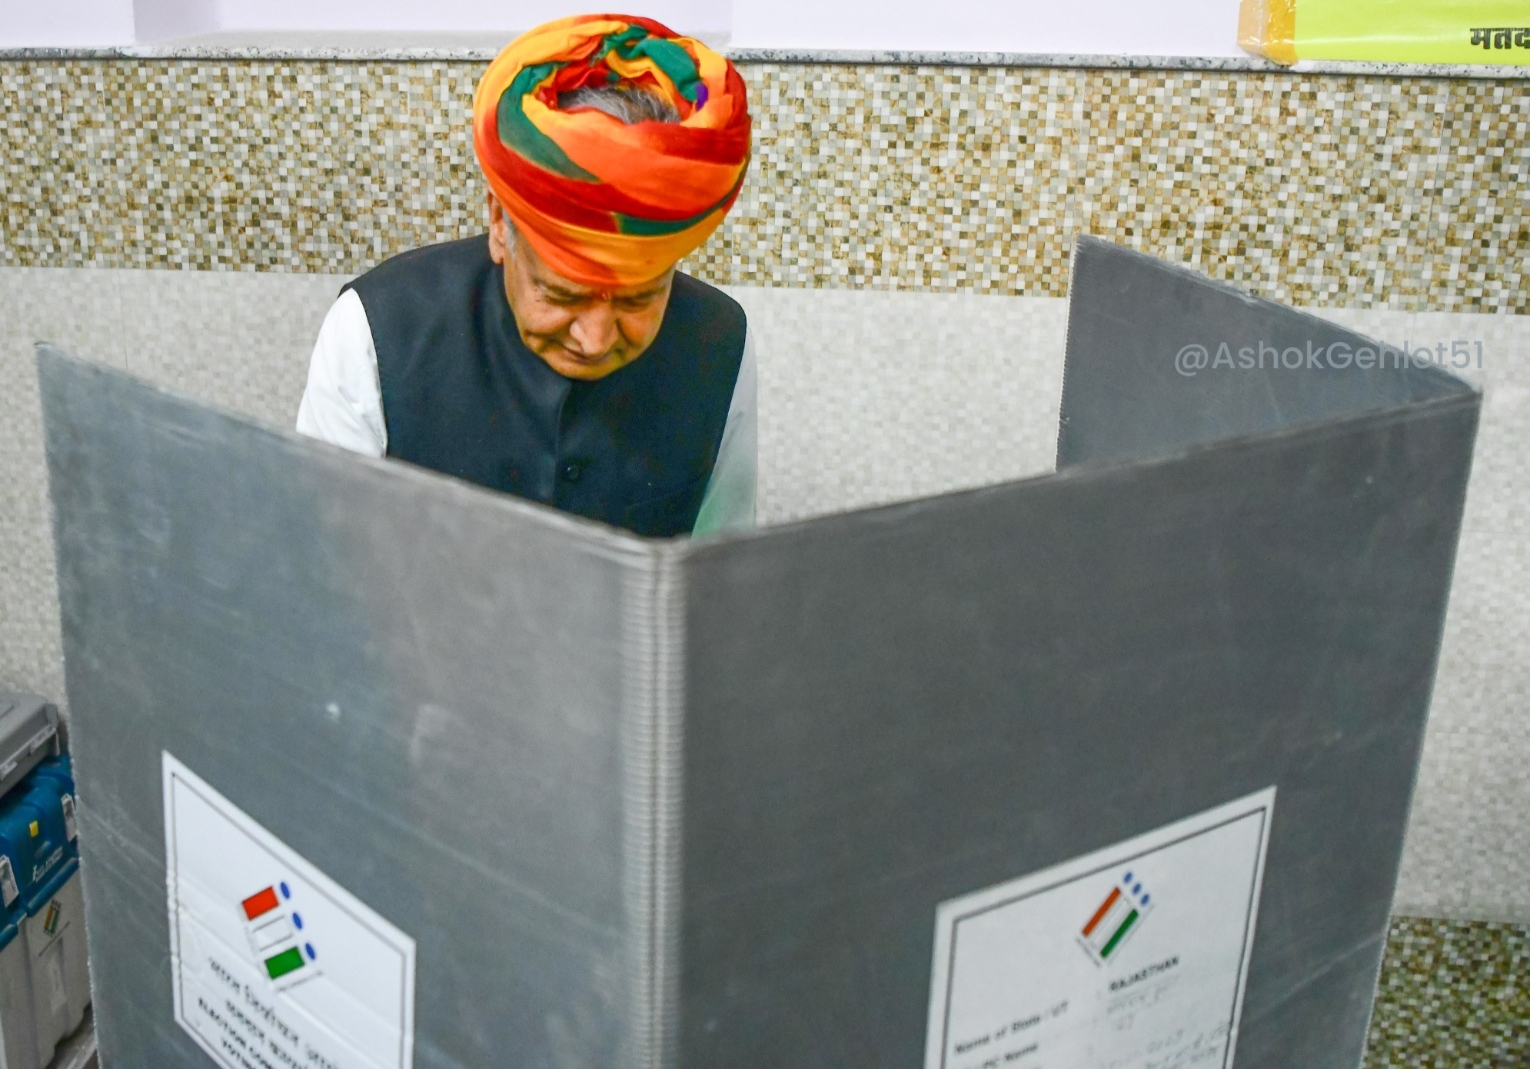 Rajasthan assembly elections: 40.27 per cent turnout till 1.30 pm, says EC